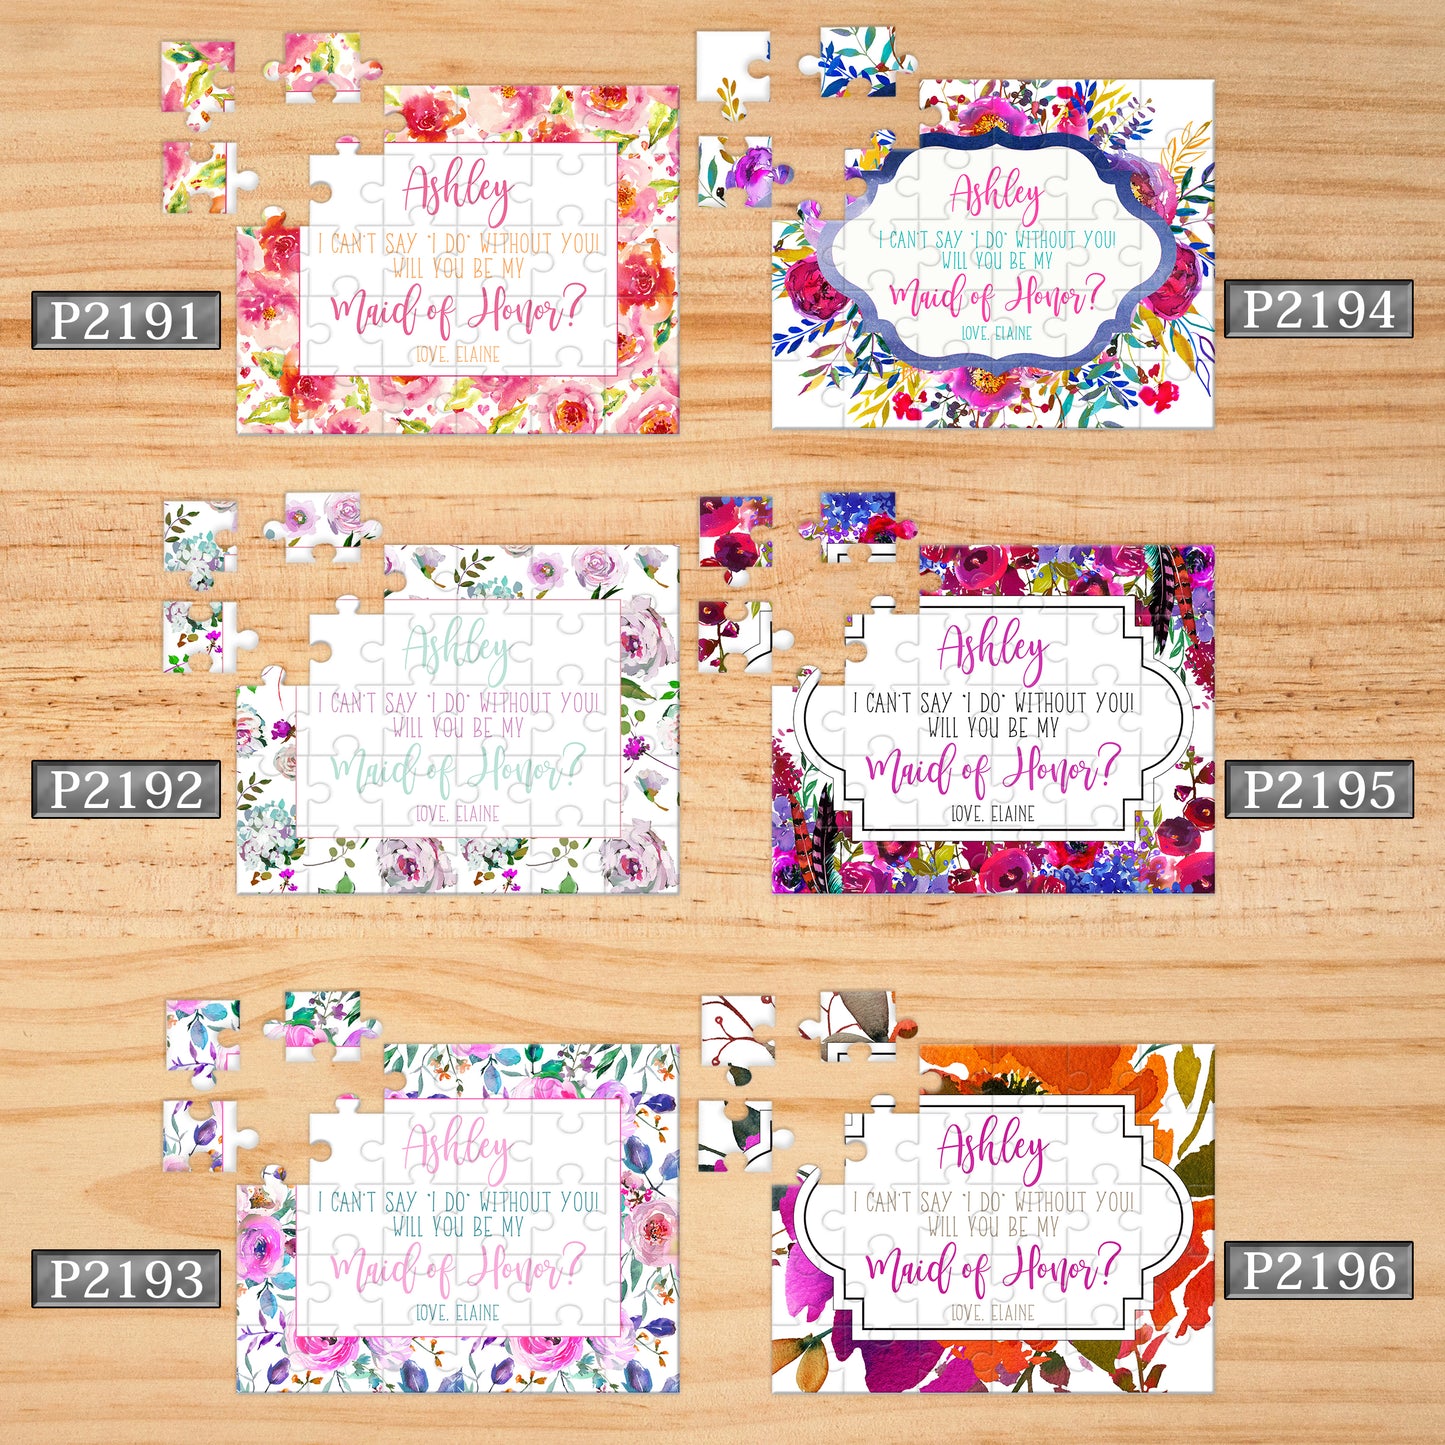 Personalized Asking Maid of Honor Puzzle - P2173 - P2205 | S'Berry Boutique